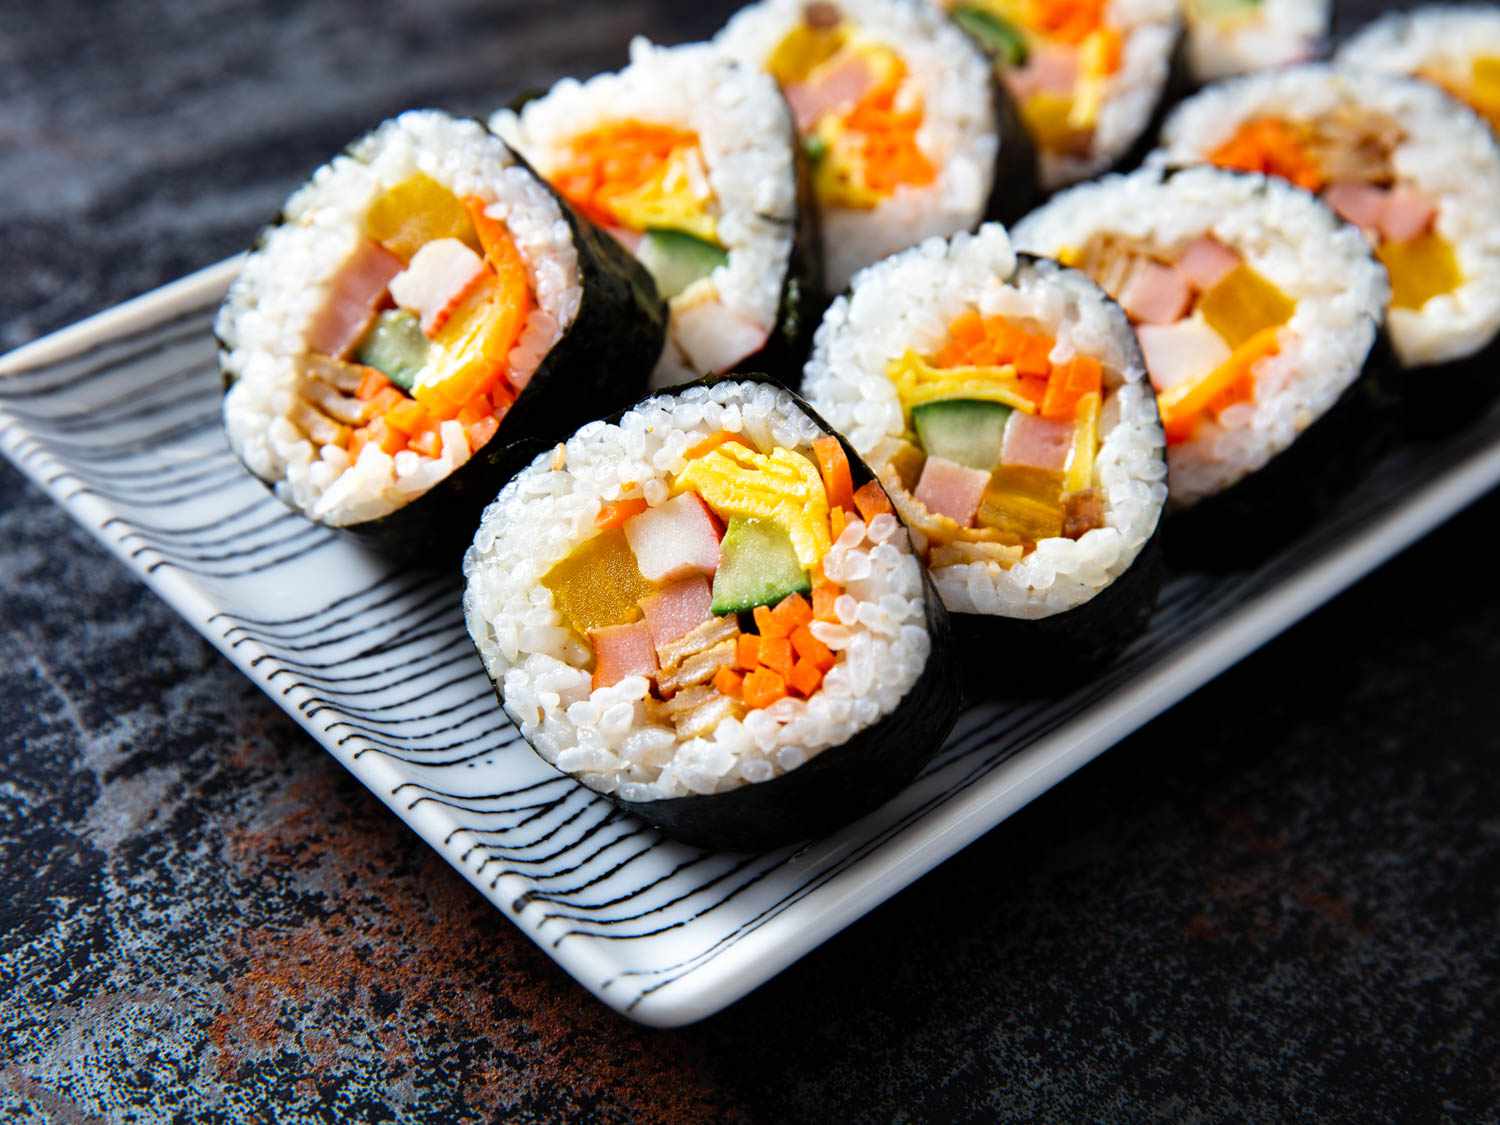 Costco Scores Big: New Bulk Kimbap Rolls Outshine Trader Joe’s, Offering More Bang for Your Buck